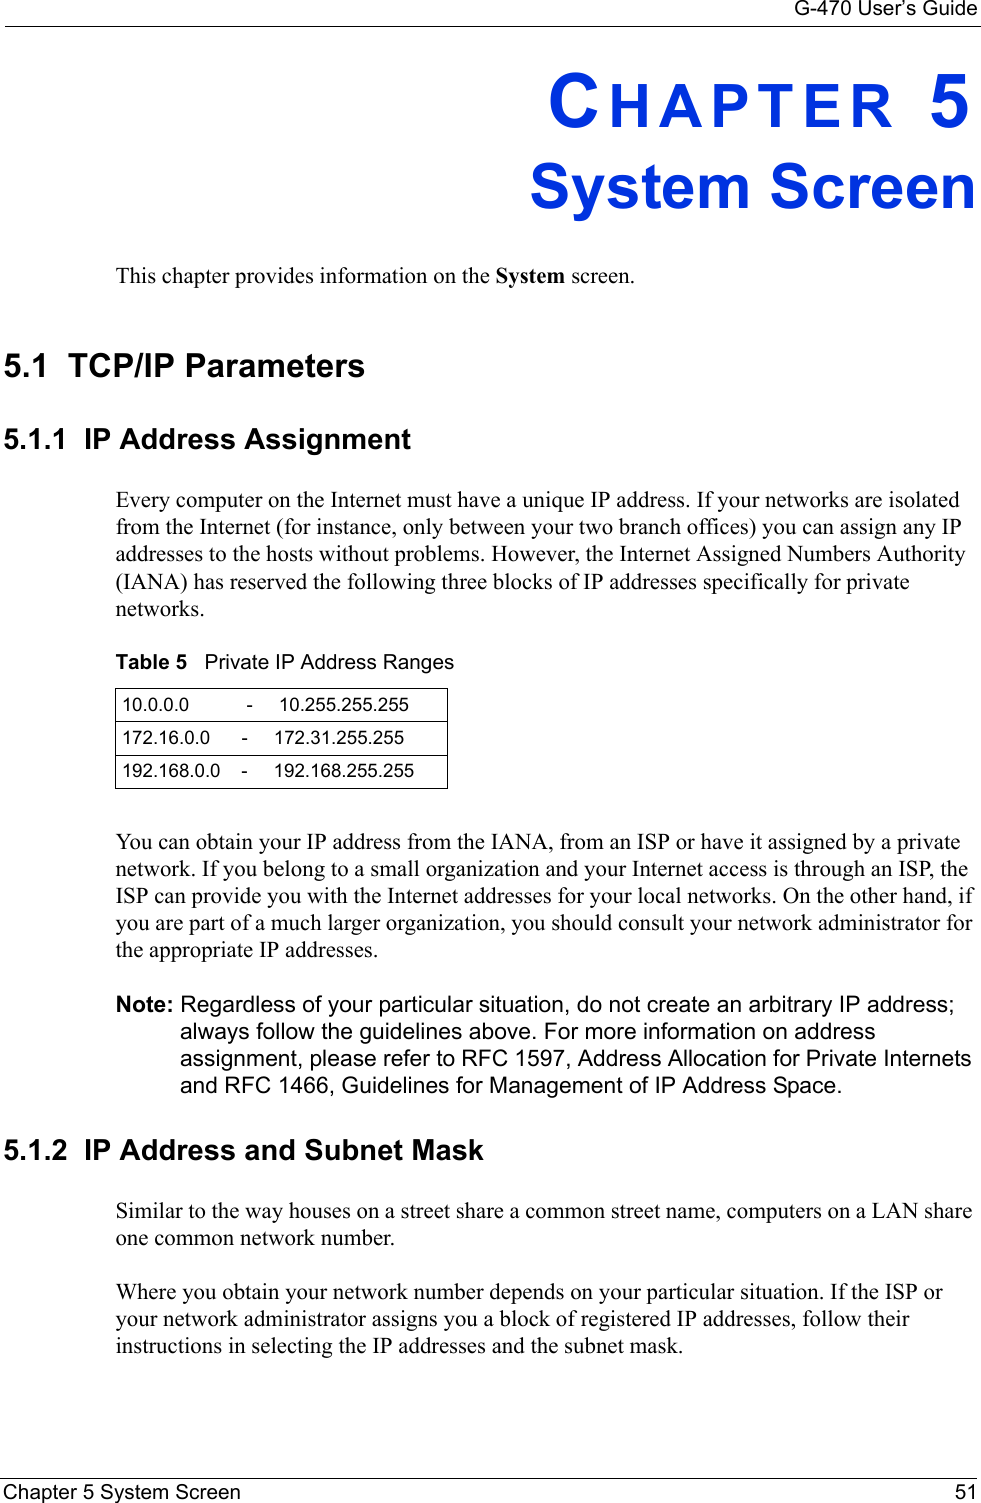 G-470 User’s GuideChapter 5 System Screen 51CHAPTER 5System ScreenThis chapter provides information on the System screen.5.1  TCP/IP Parameters5.1.1  IP Address Assignment Every computer on the Internet must have a unique IP address. If your networks are isolated from the Internet (for instance, only between your two branch offices) you can assign any IP addresses to the hosts without problems. However, the Internet Assigned Numbers Authority (IANA) has reserved the following three blocks of IP addresses specifically for private networks.You can obtain your IP address from the IANA, from an ISP or have it assigned by a private network. If you belong to a small organization and your Internet access is through an ISP, the ISP can provide you with the Internet addresses for your local networks. On the other hand, if you are part of a much larger organization, you should consult your network administrator for the appropriate IP addresses.Note: Regardless of your particular situation, do not create an arbitrary IP address; always follow the guidelines above. For more information on address assignment, please refer to RFC 1597, Address Allocation for Private Internets and RFC 1466, Guidelines for Management of IP Address Space.5.1.2  IP Address and Subnet MaskSimilar to the way houses on a street share a common street name, computers on a LAN share one common network number.Where you obtain your network number depends on your particular situation. If the ISP or your network administrator assigns you a block of registered IP addresses, follow their instructions in selecting the IP addresses and the subnet mask.Table 5   Private IP Address Ranges10.0.0.0           -     10.255.255.255172.16.0.0      -     172.31.255.255192.168.0.0    -     192.168.255.255